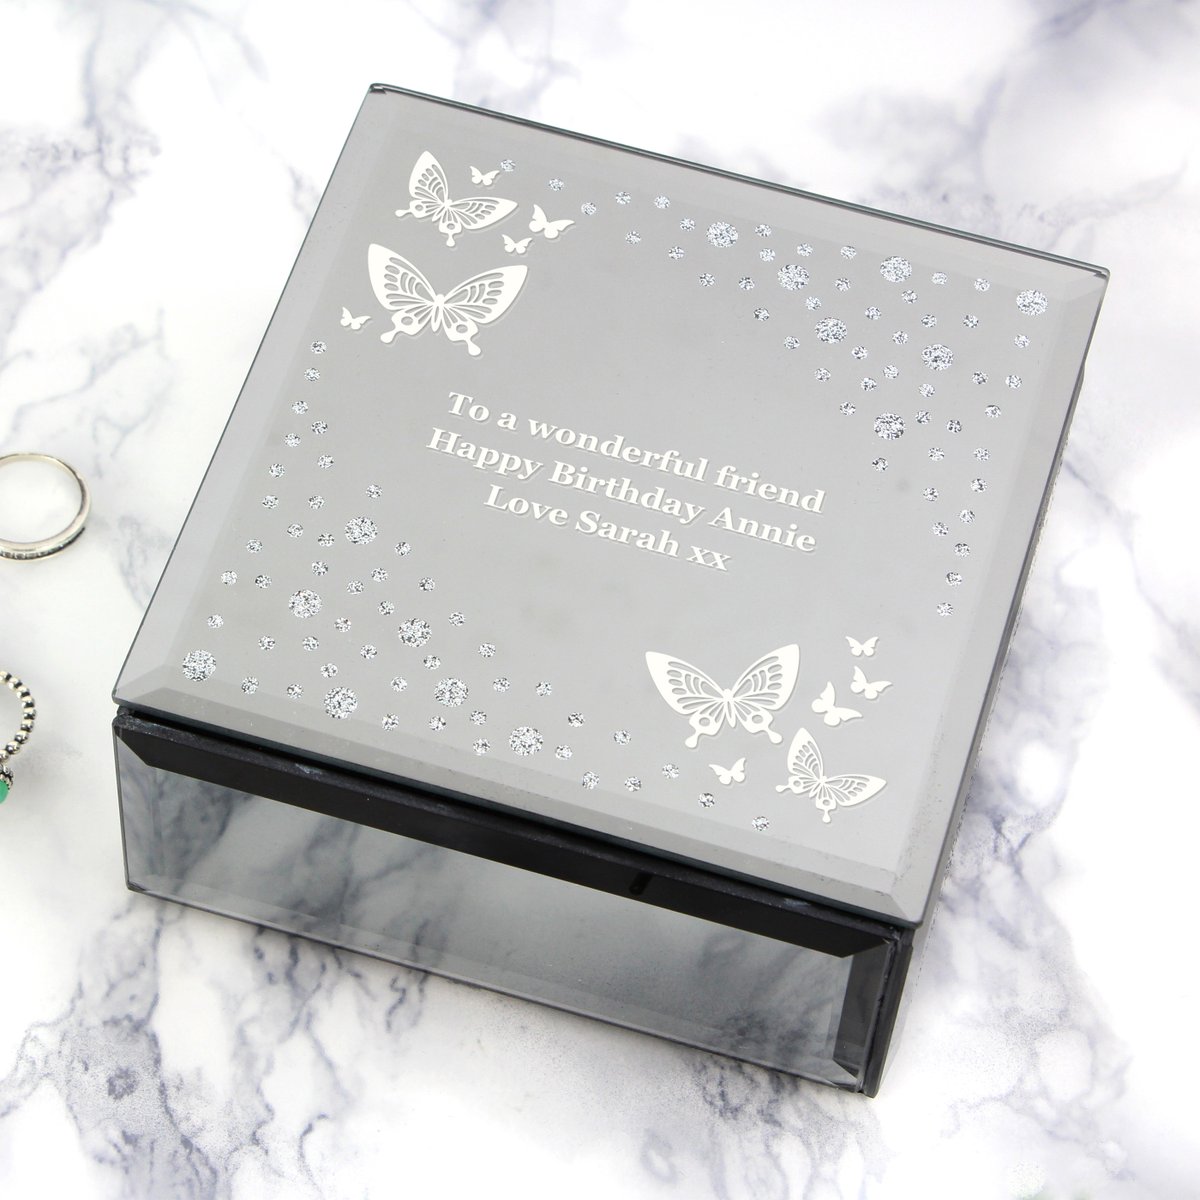 Fully lined & personalised with any message on the lid, this glass trinket box is perfect for storing rings & things lilybluestore.com/products/perso… #giftideas #mhhsbd #elevenseshour #earlybiz